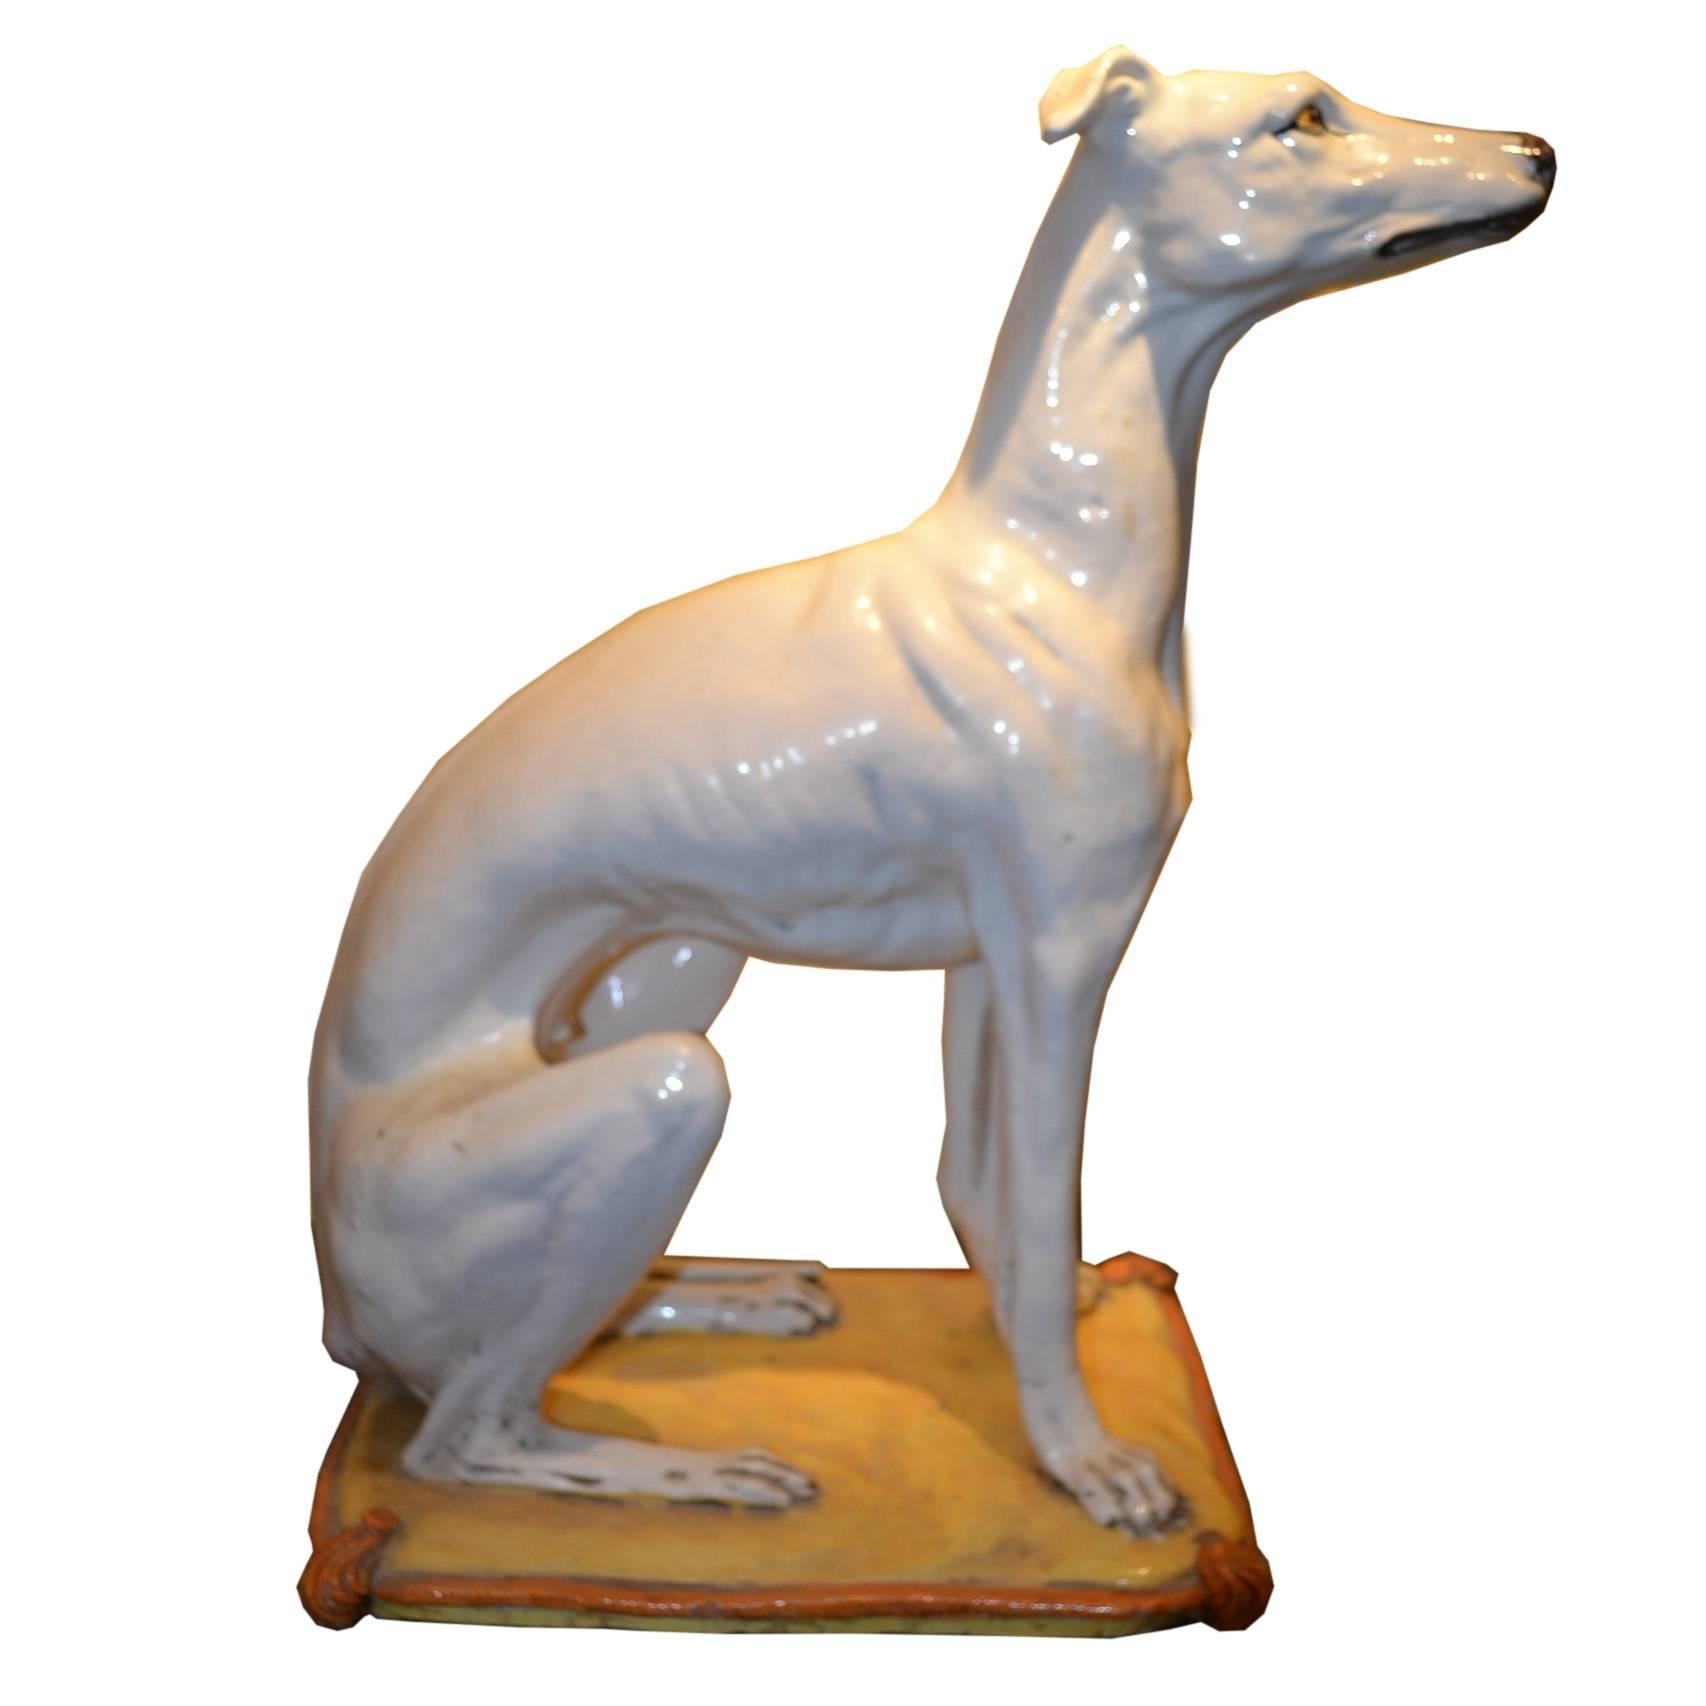 Terracotta Seated Figure of a Greyhound Dog on Pillow